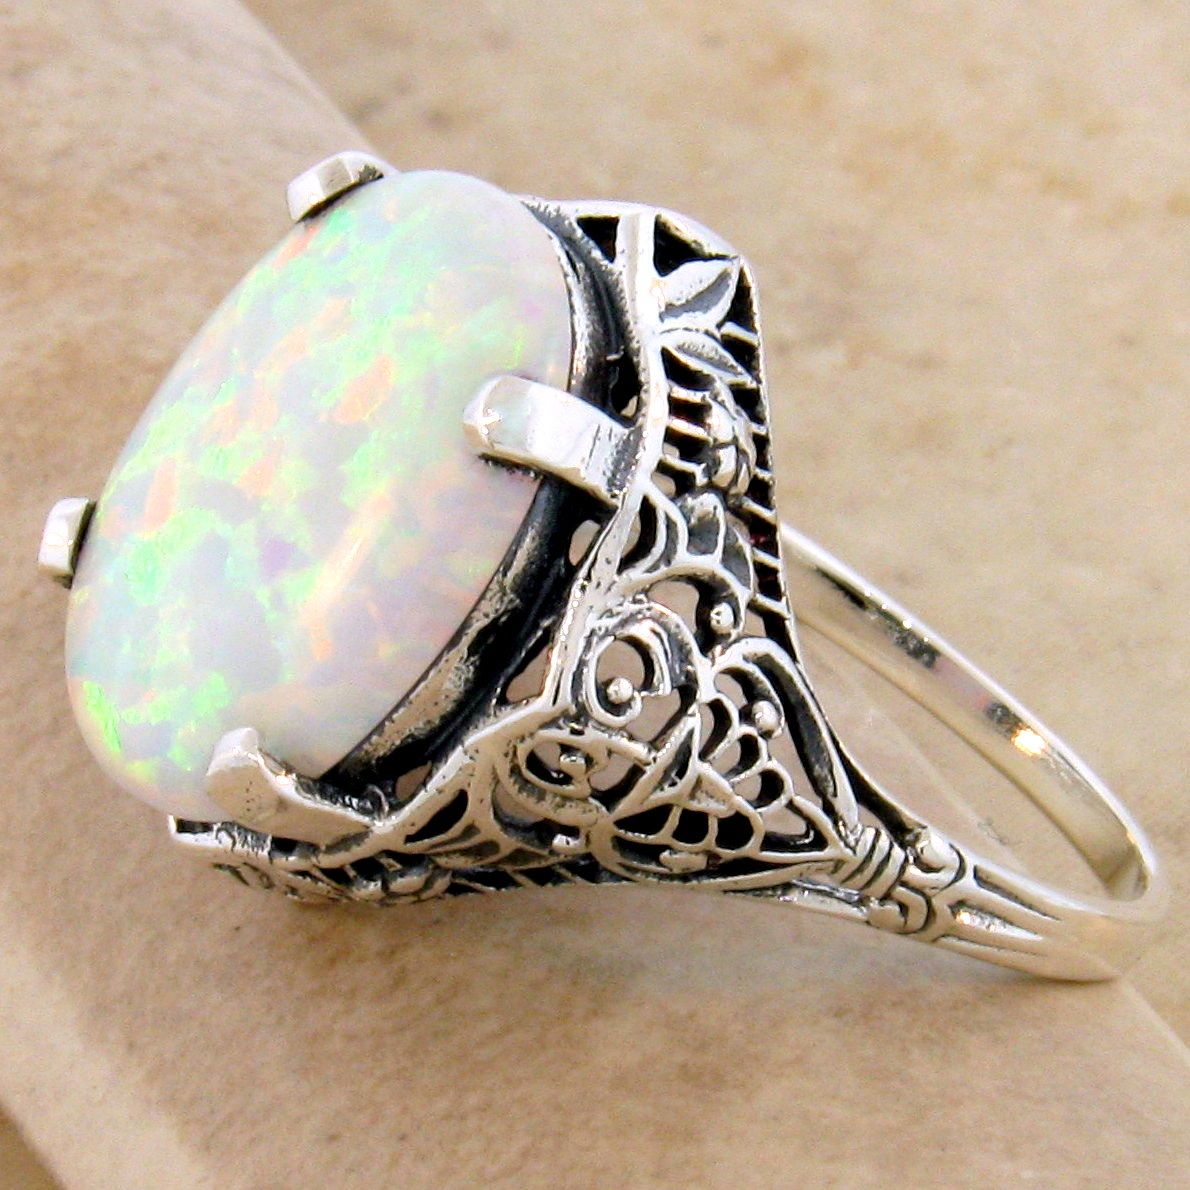 ANTIQUE STYLE VICTORIAN 925 STERLING SILVER LAB OPAL FILIGREE RING ...